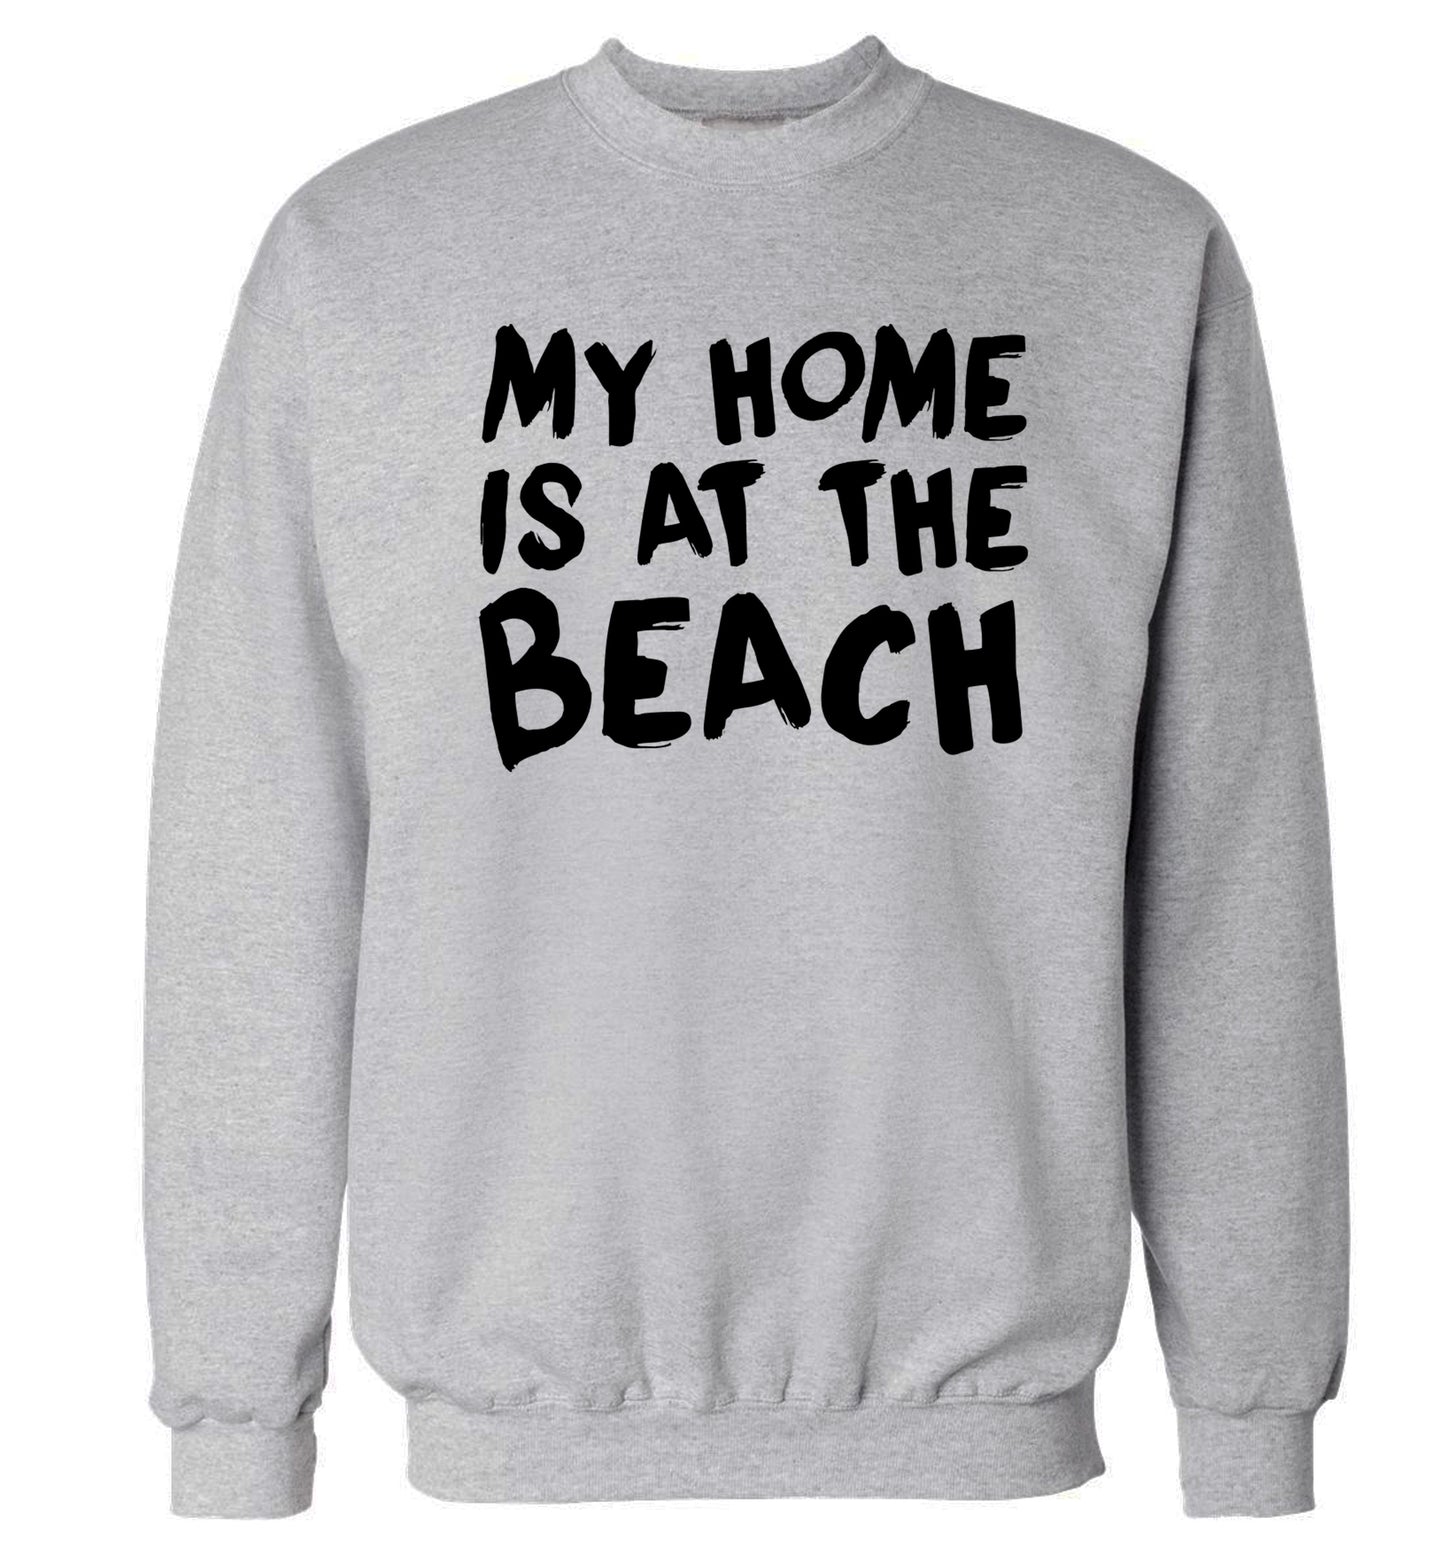 My home is at the beach Adult's unisex grey Sweater 2XL